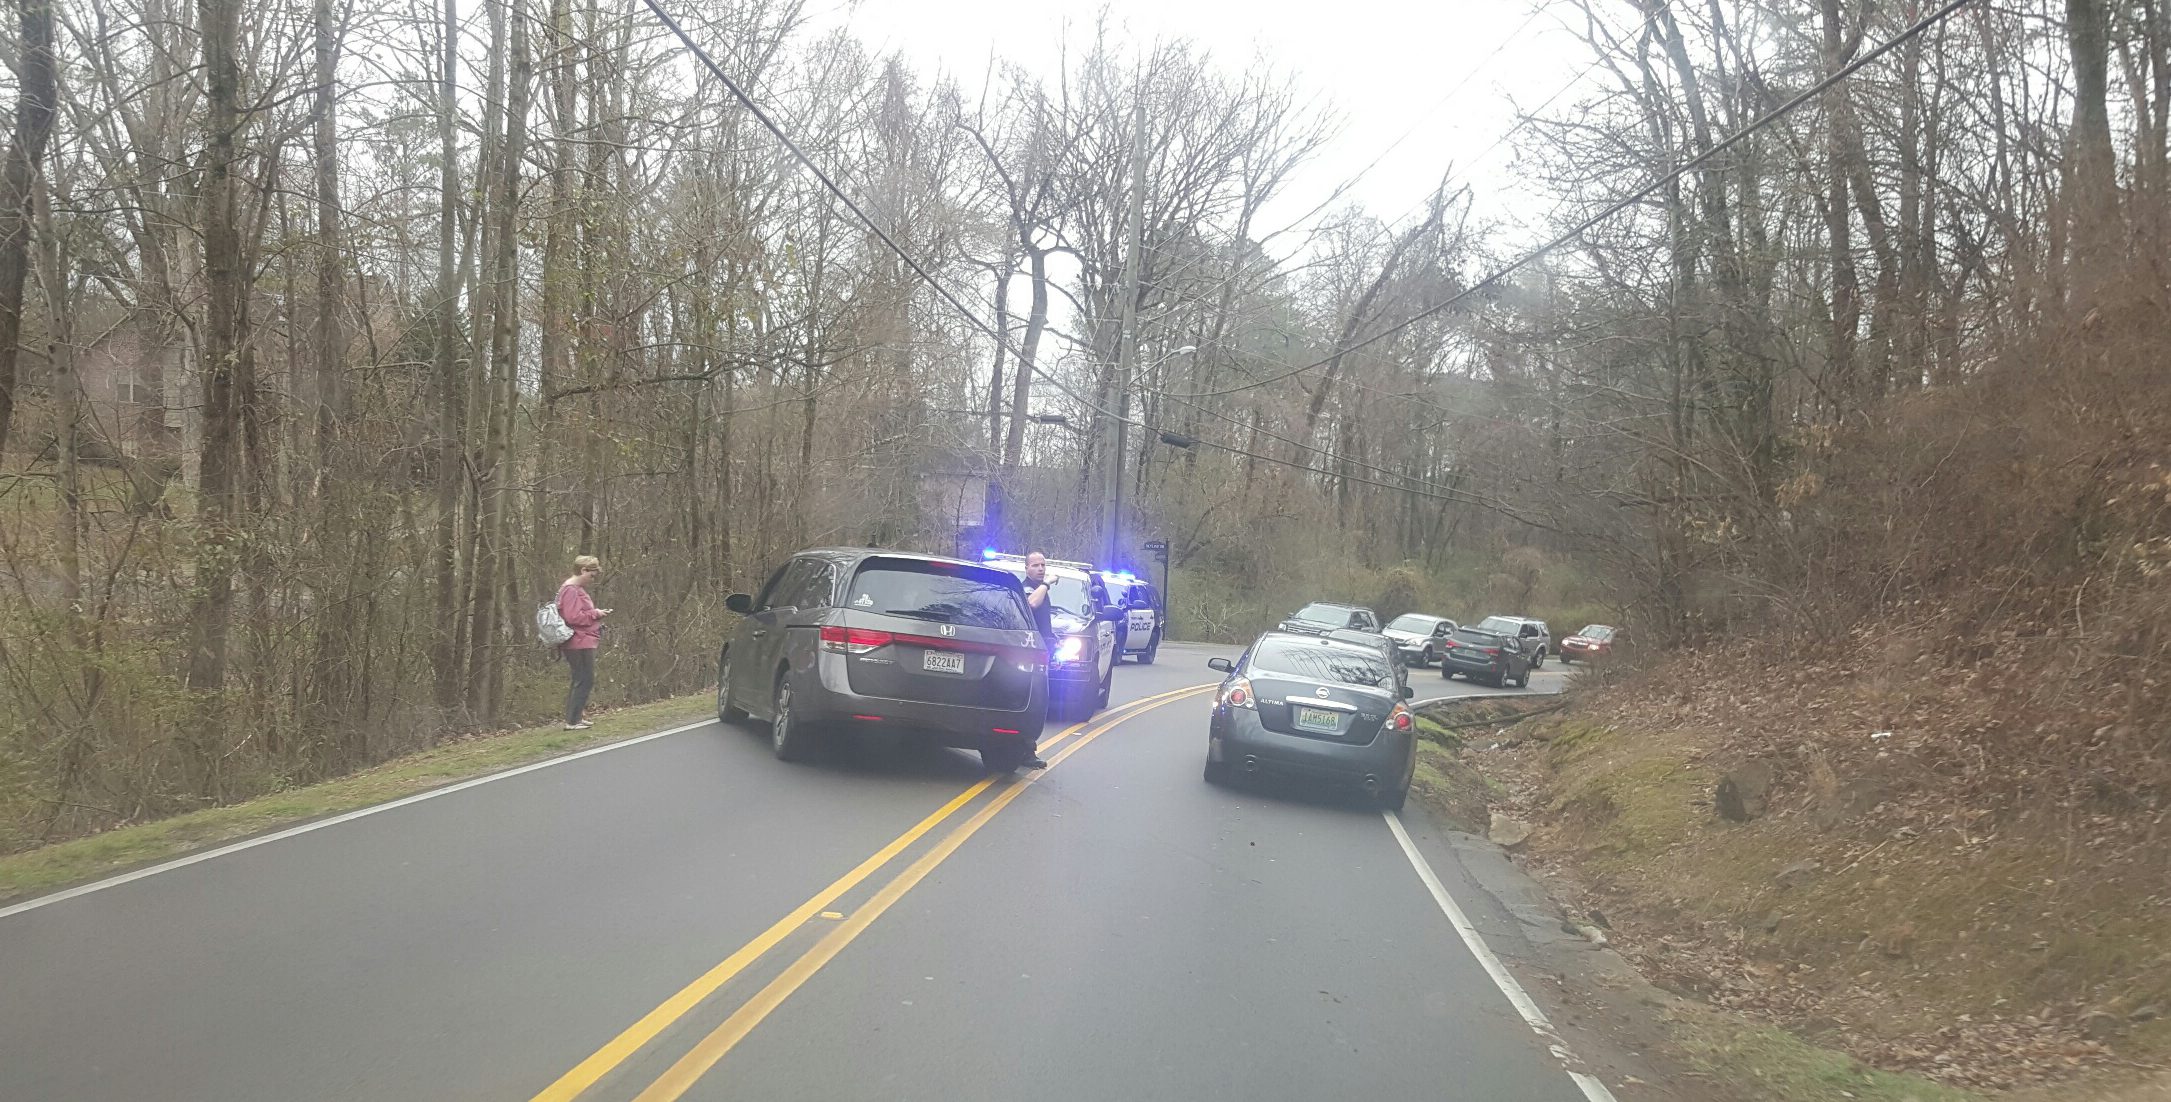 Wreck on North Chalkville Road causing traffic delays